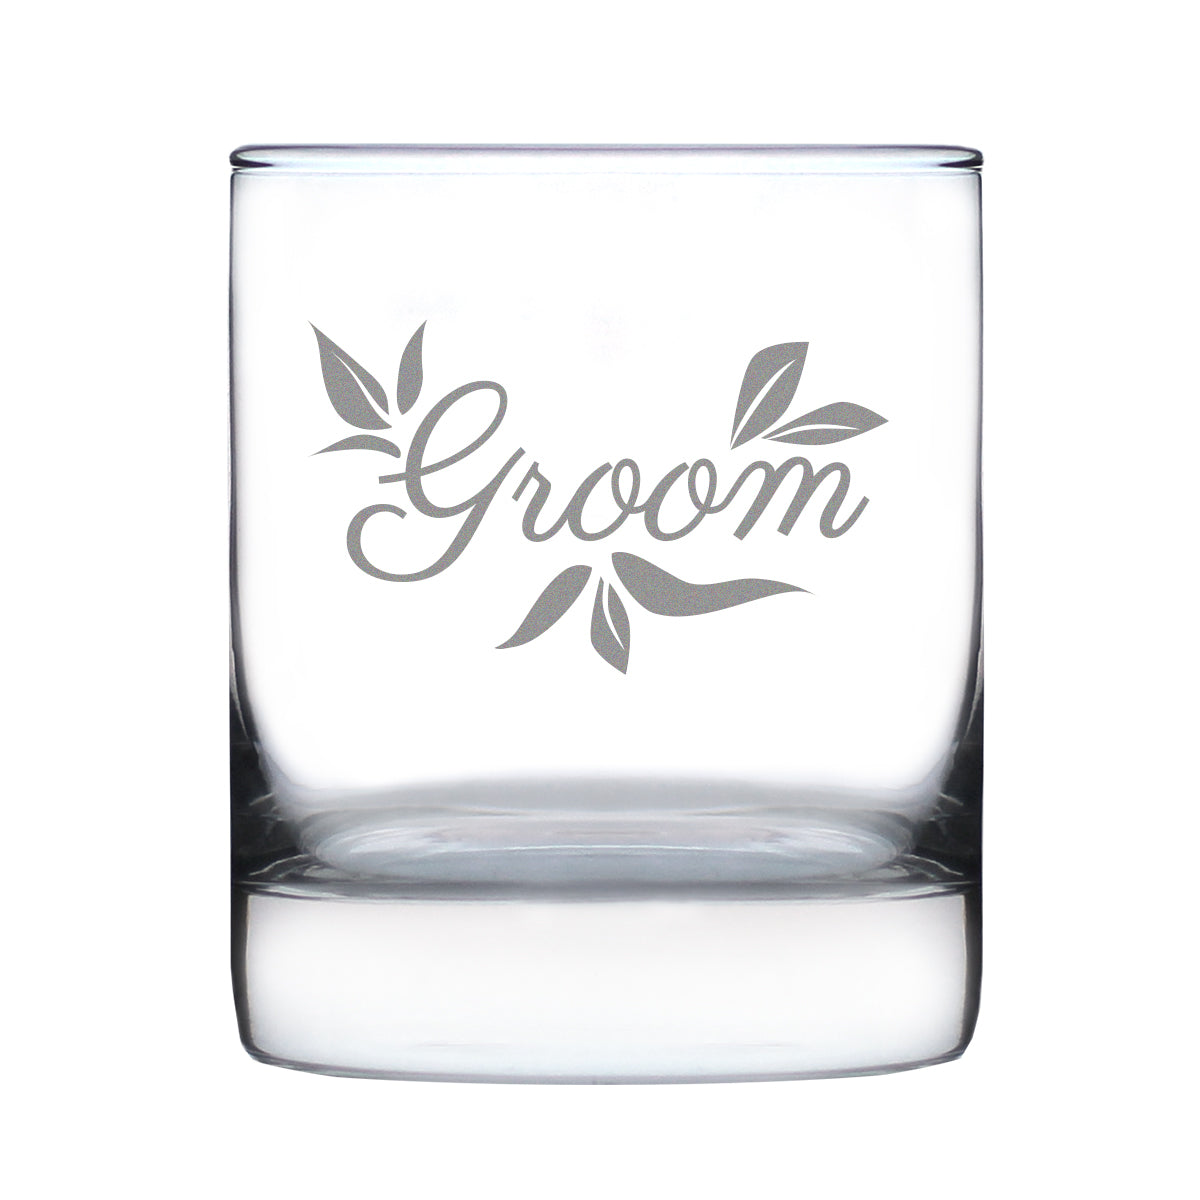 Groom Old Fashioned Rocks Glass - Unique Wedding Gift for Groom - Engraved Wedding Cup Gift